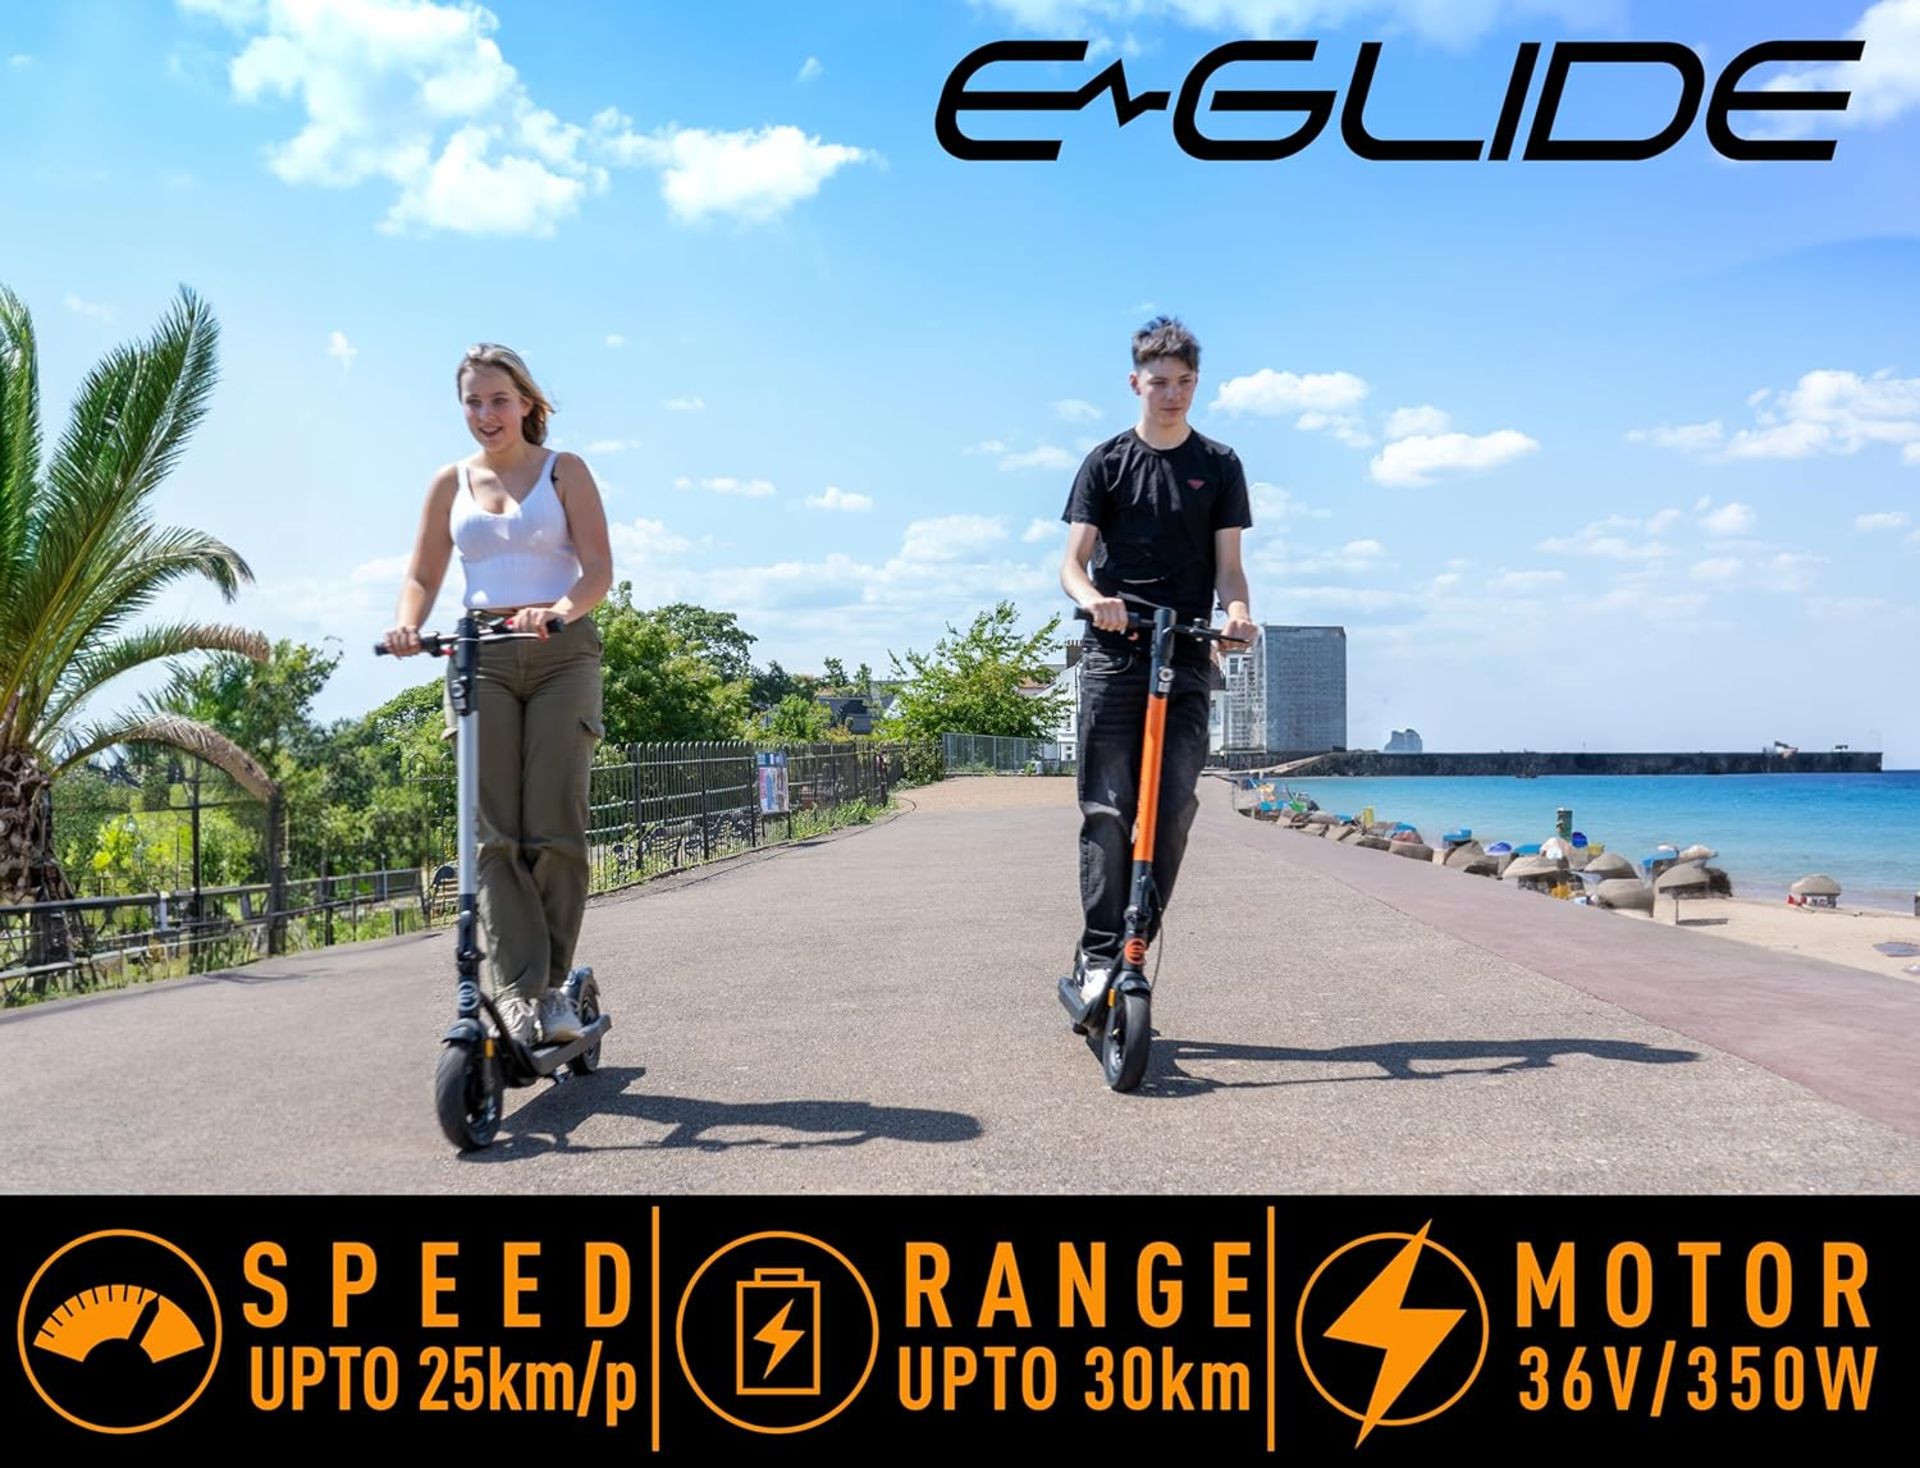 Brand New E-Glide V2 Electric Scooter Orange and Black RRP £599, Introducing a sleek and efficient - Image 3 of 6